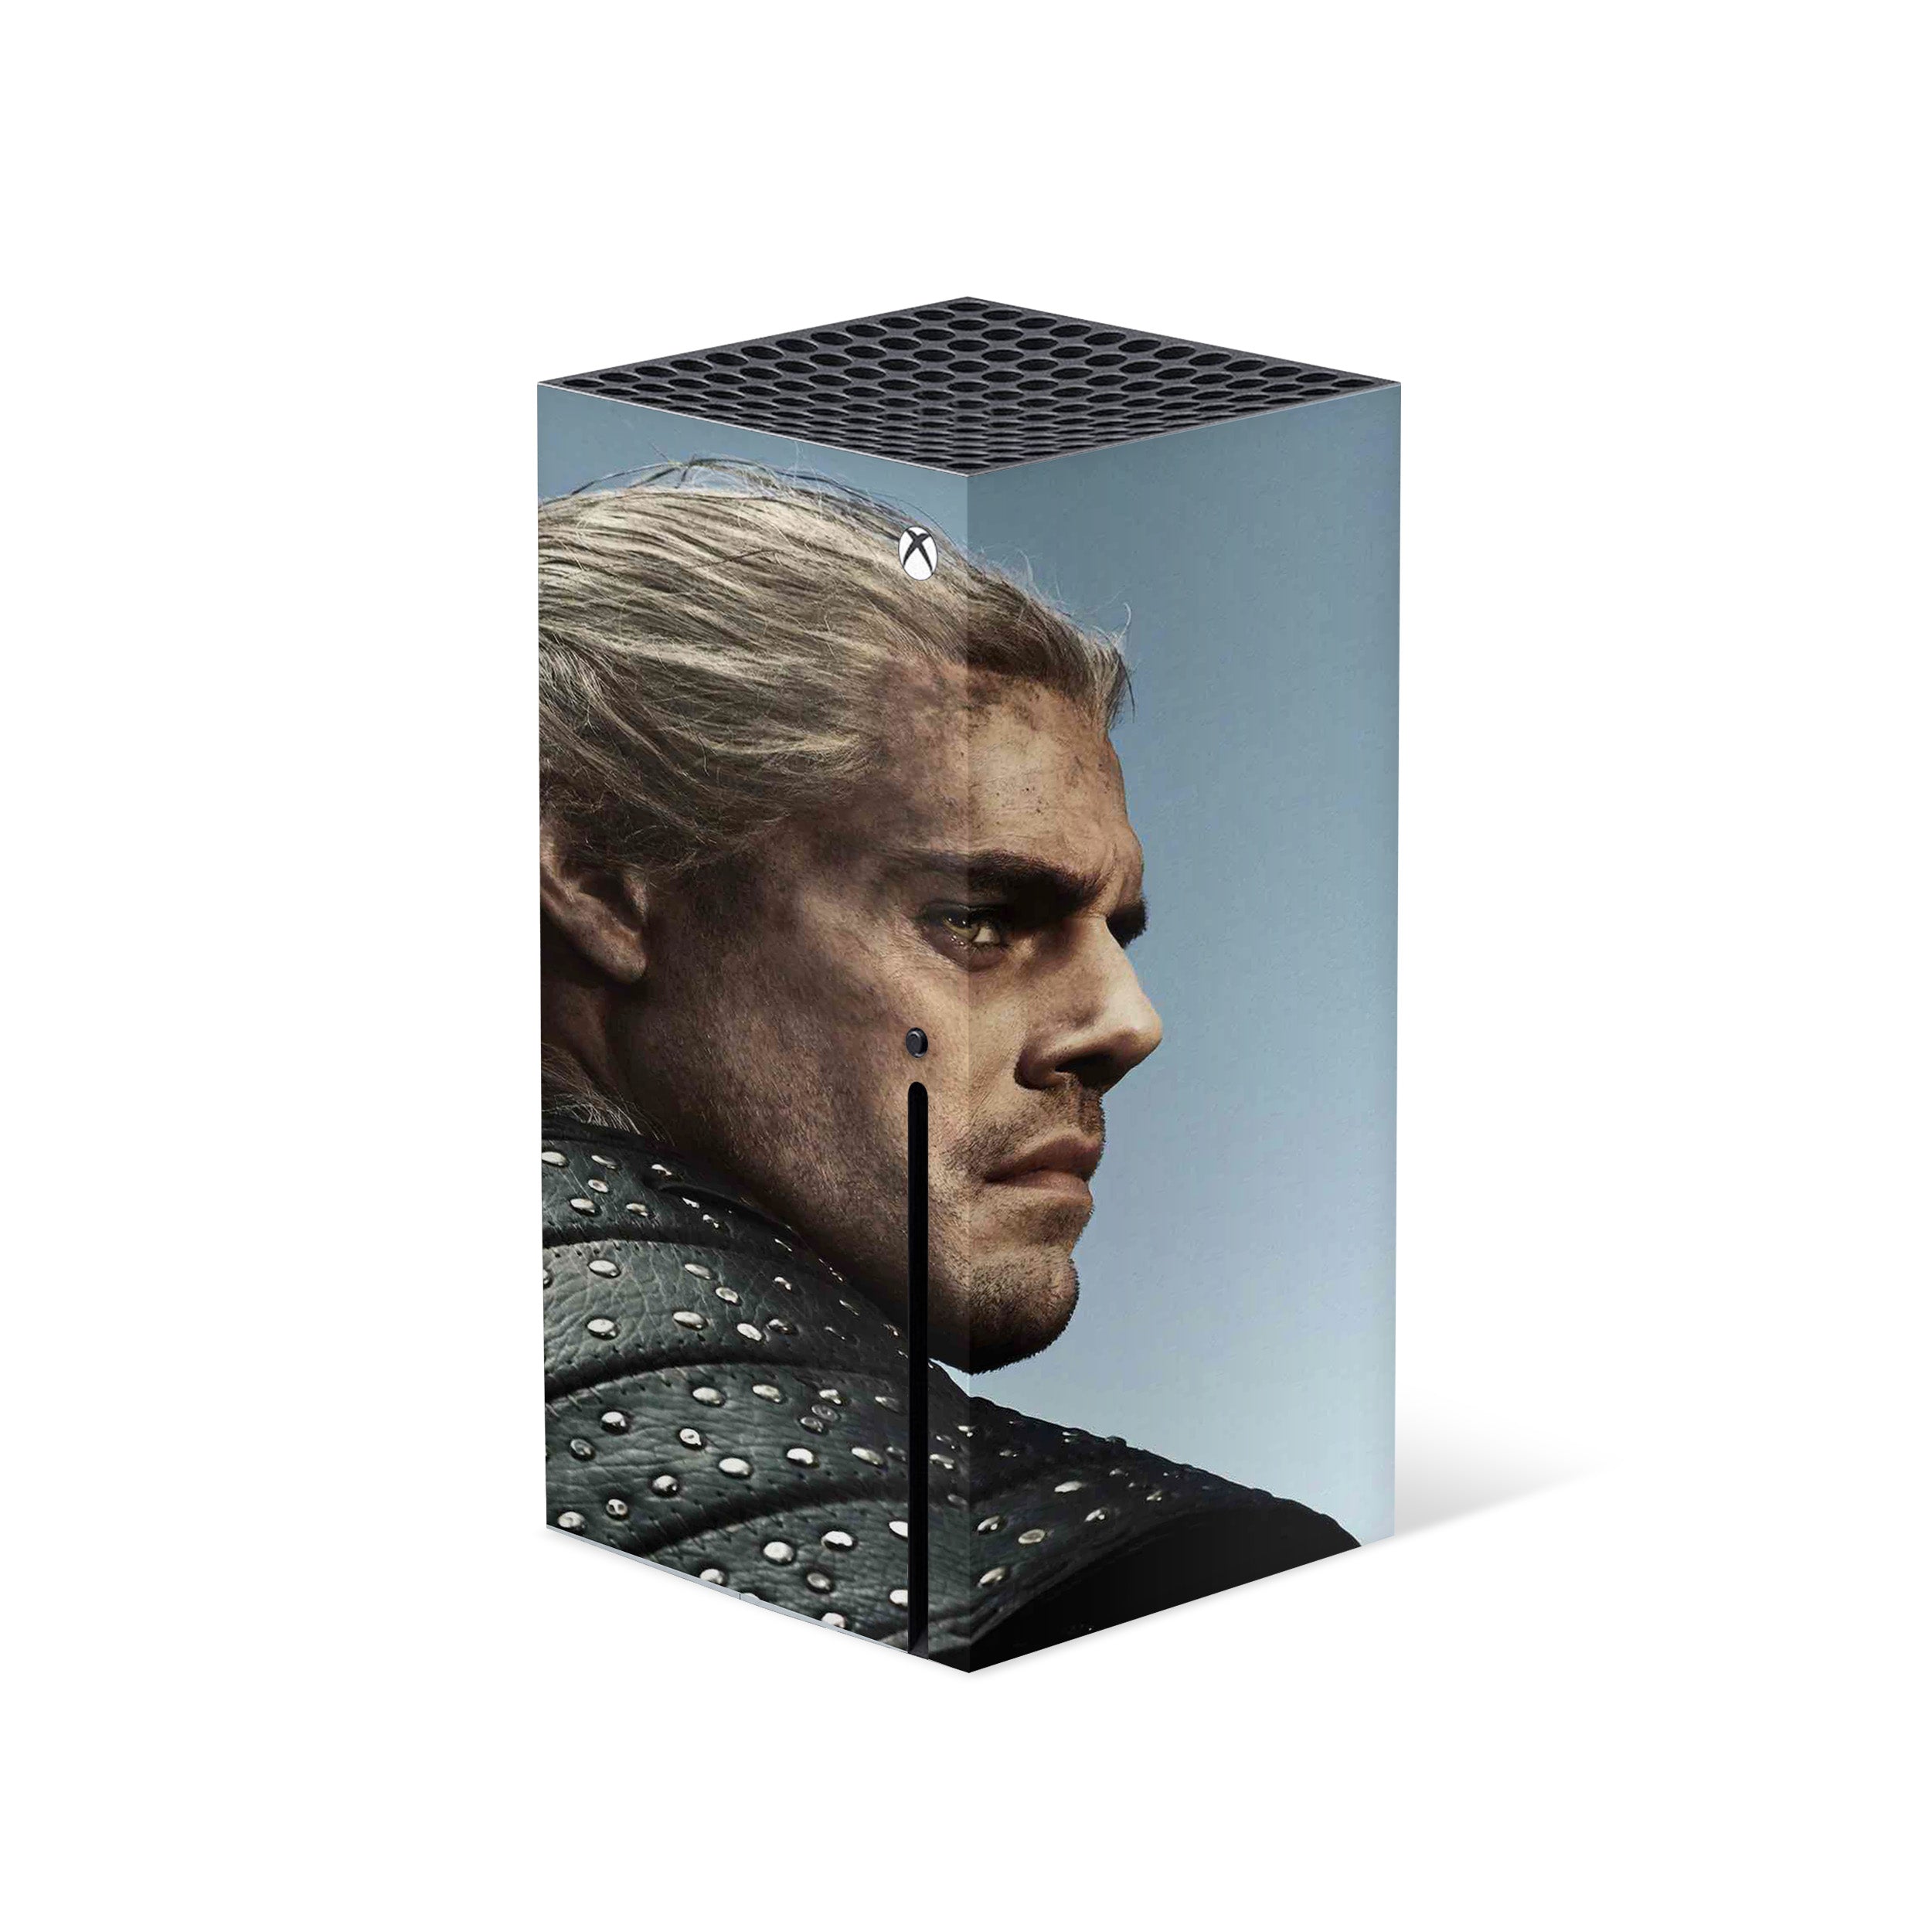 A video game skin featuring a The Witcher design for the Xbox Series X.